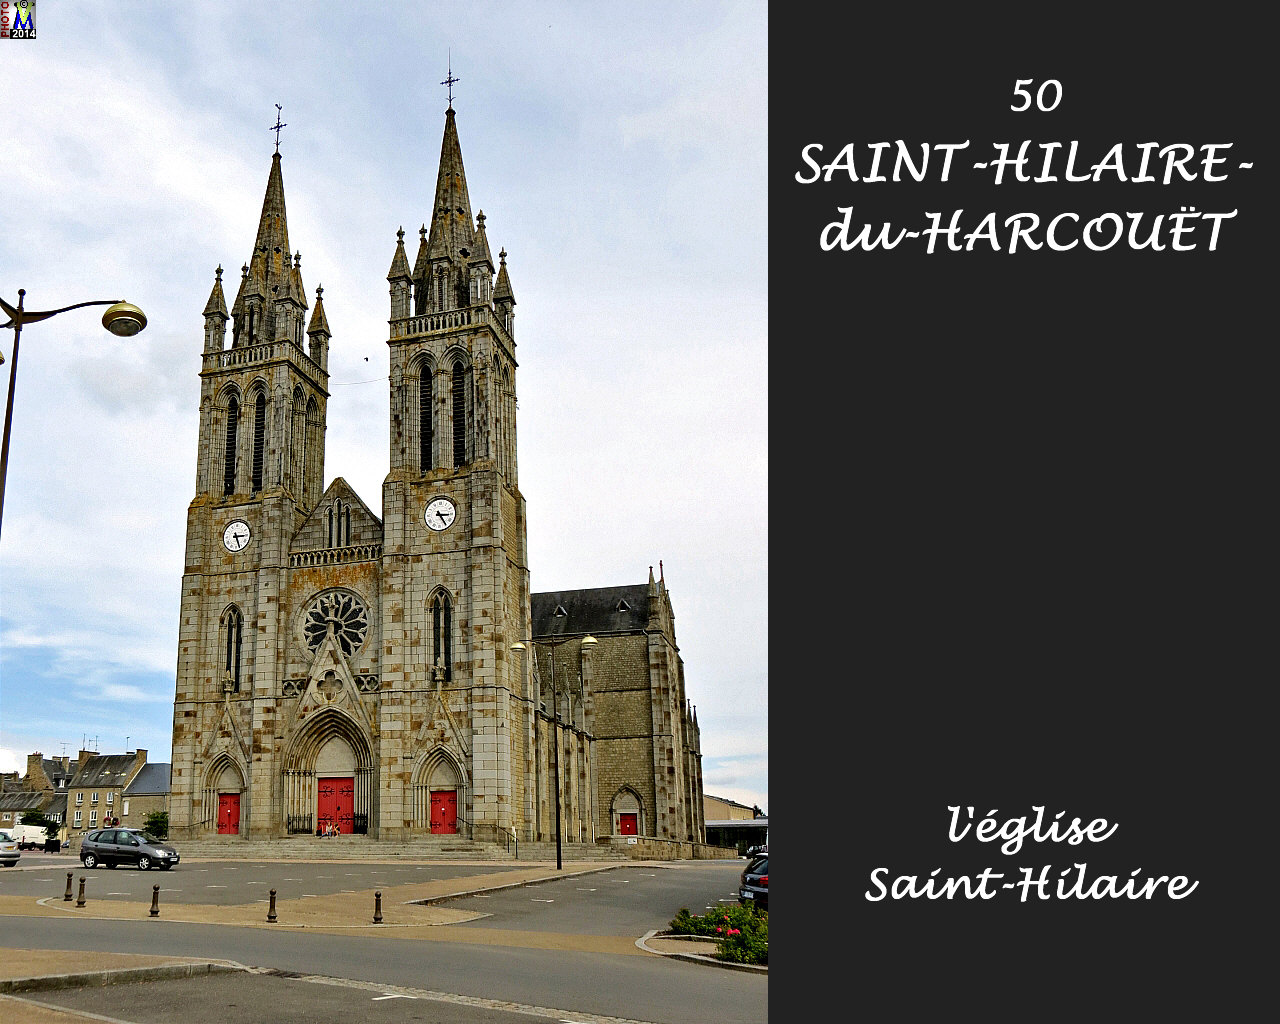 50StHILAIRE-HARCOUET_eglise_100.jpg